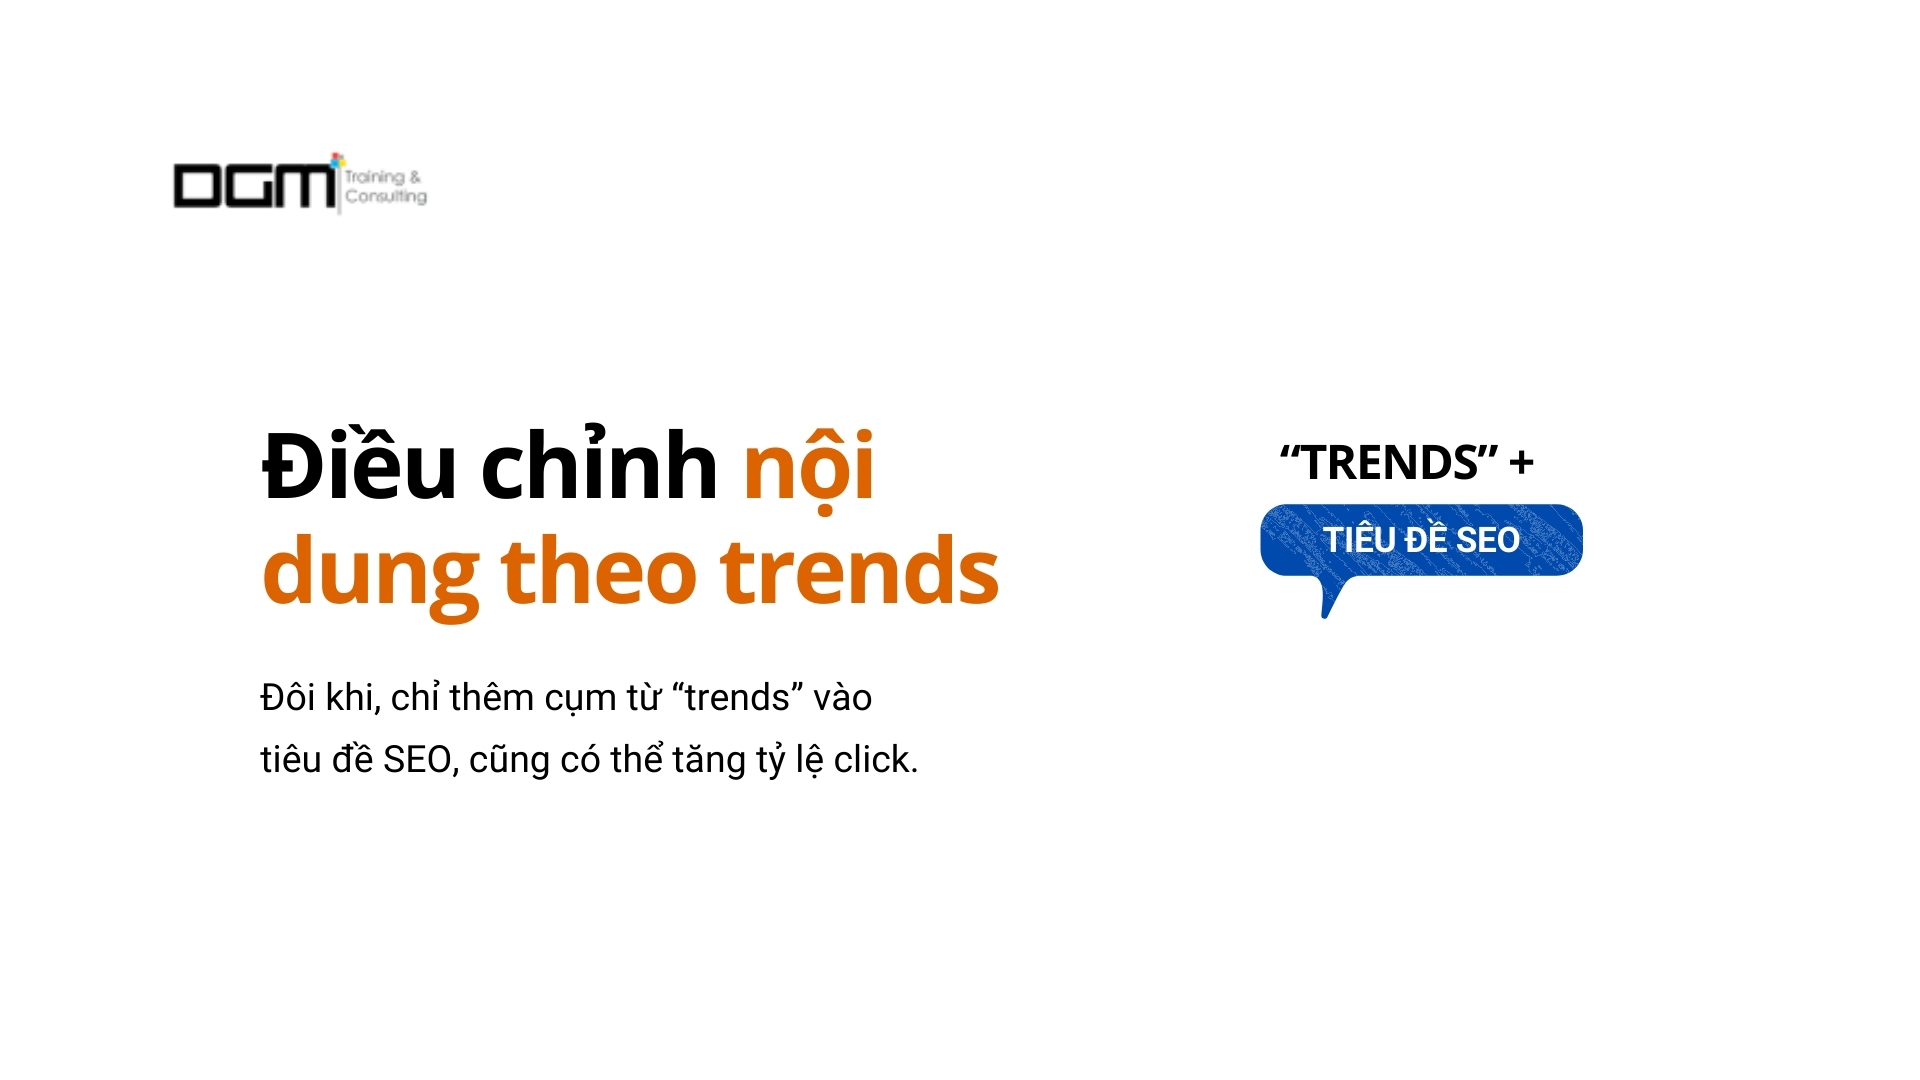 Dieu-chinh-noi-dung-theo-cac-trends